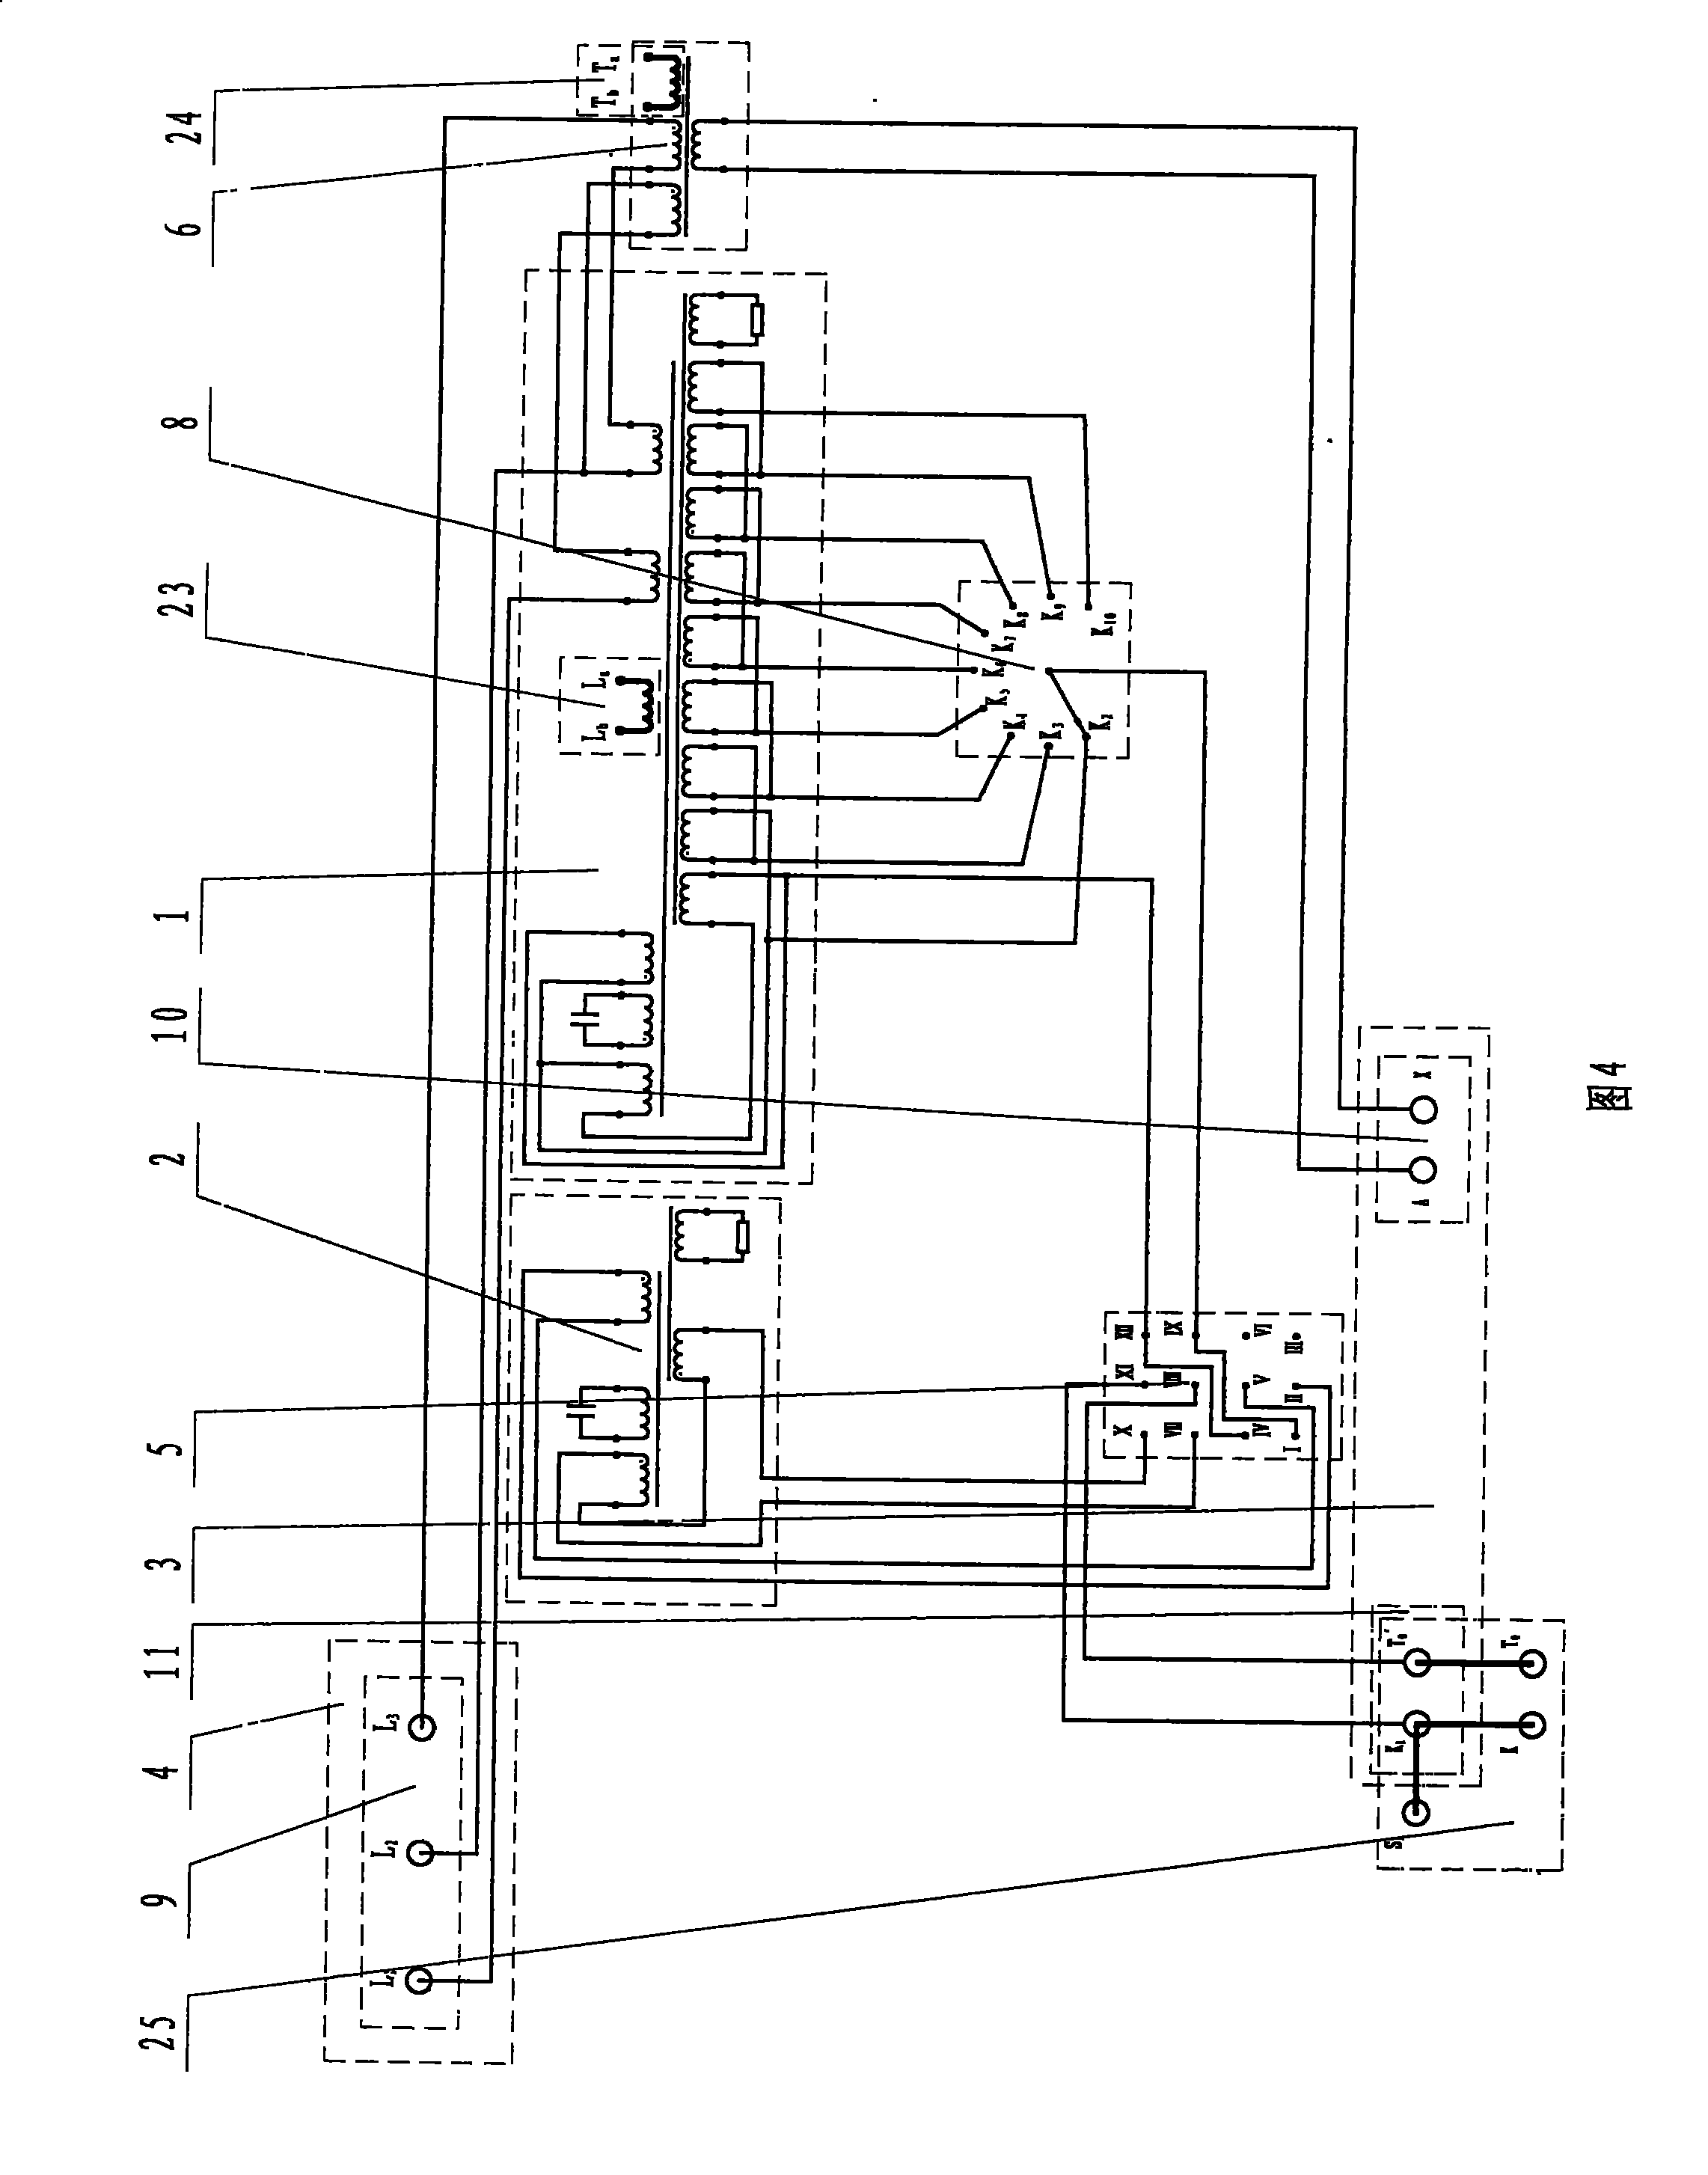 Standard current transformer integration apparatus for on-site detection